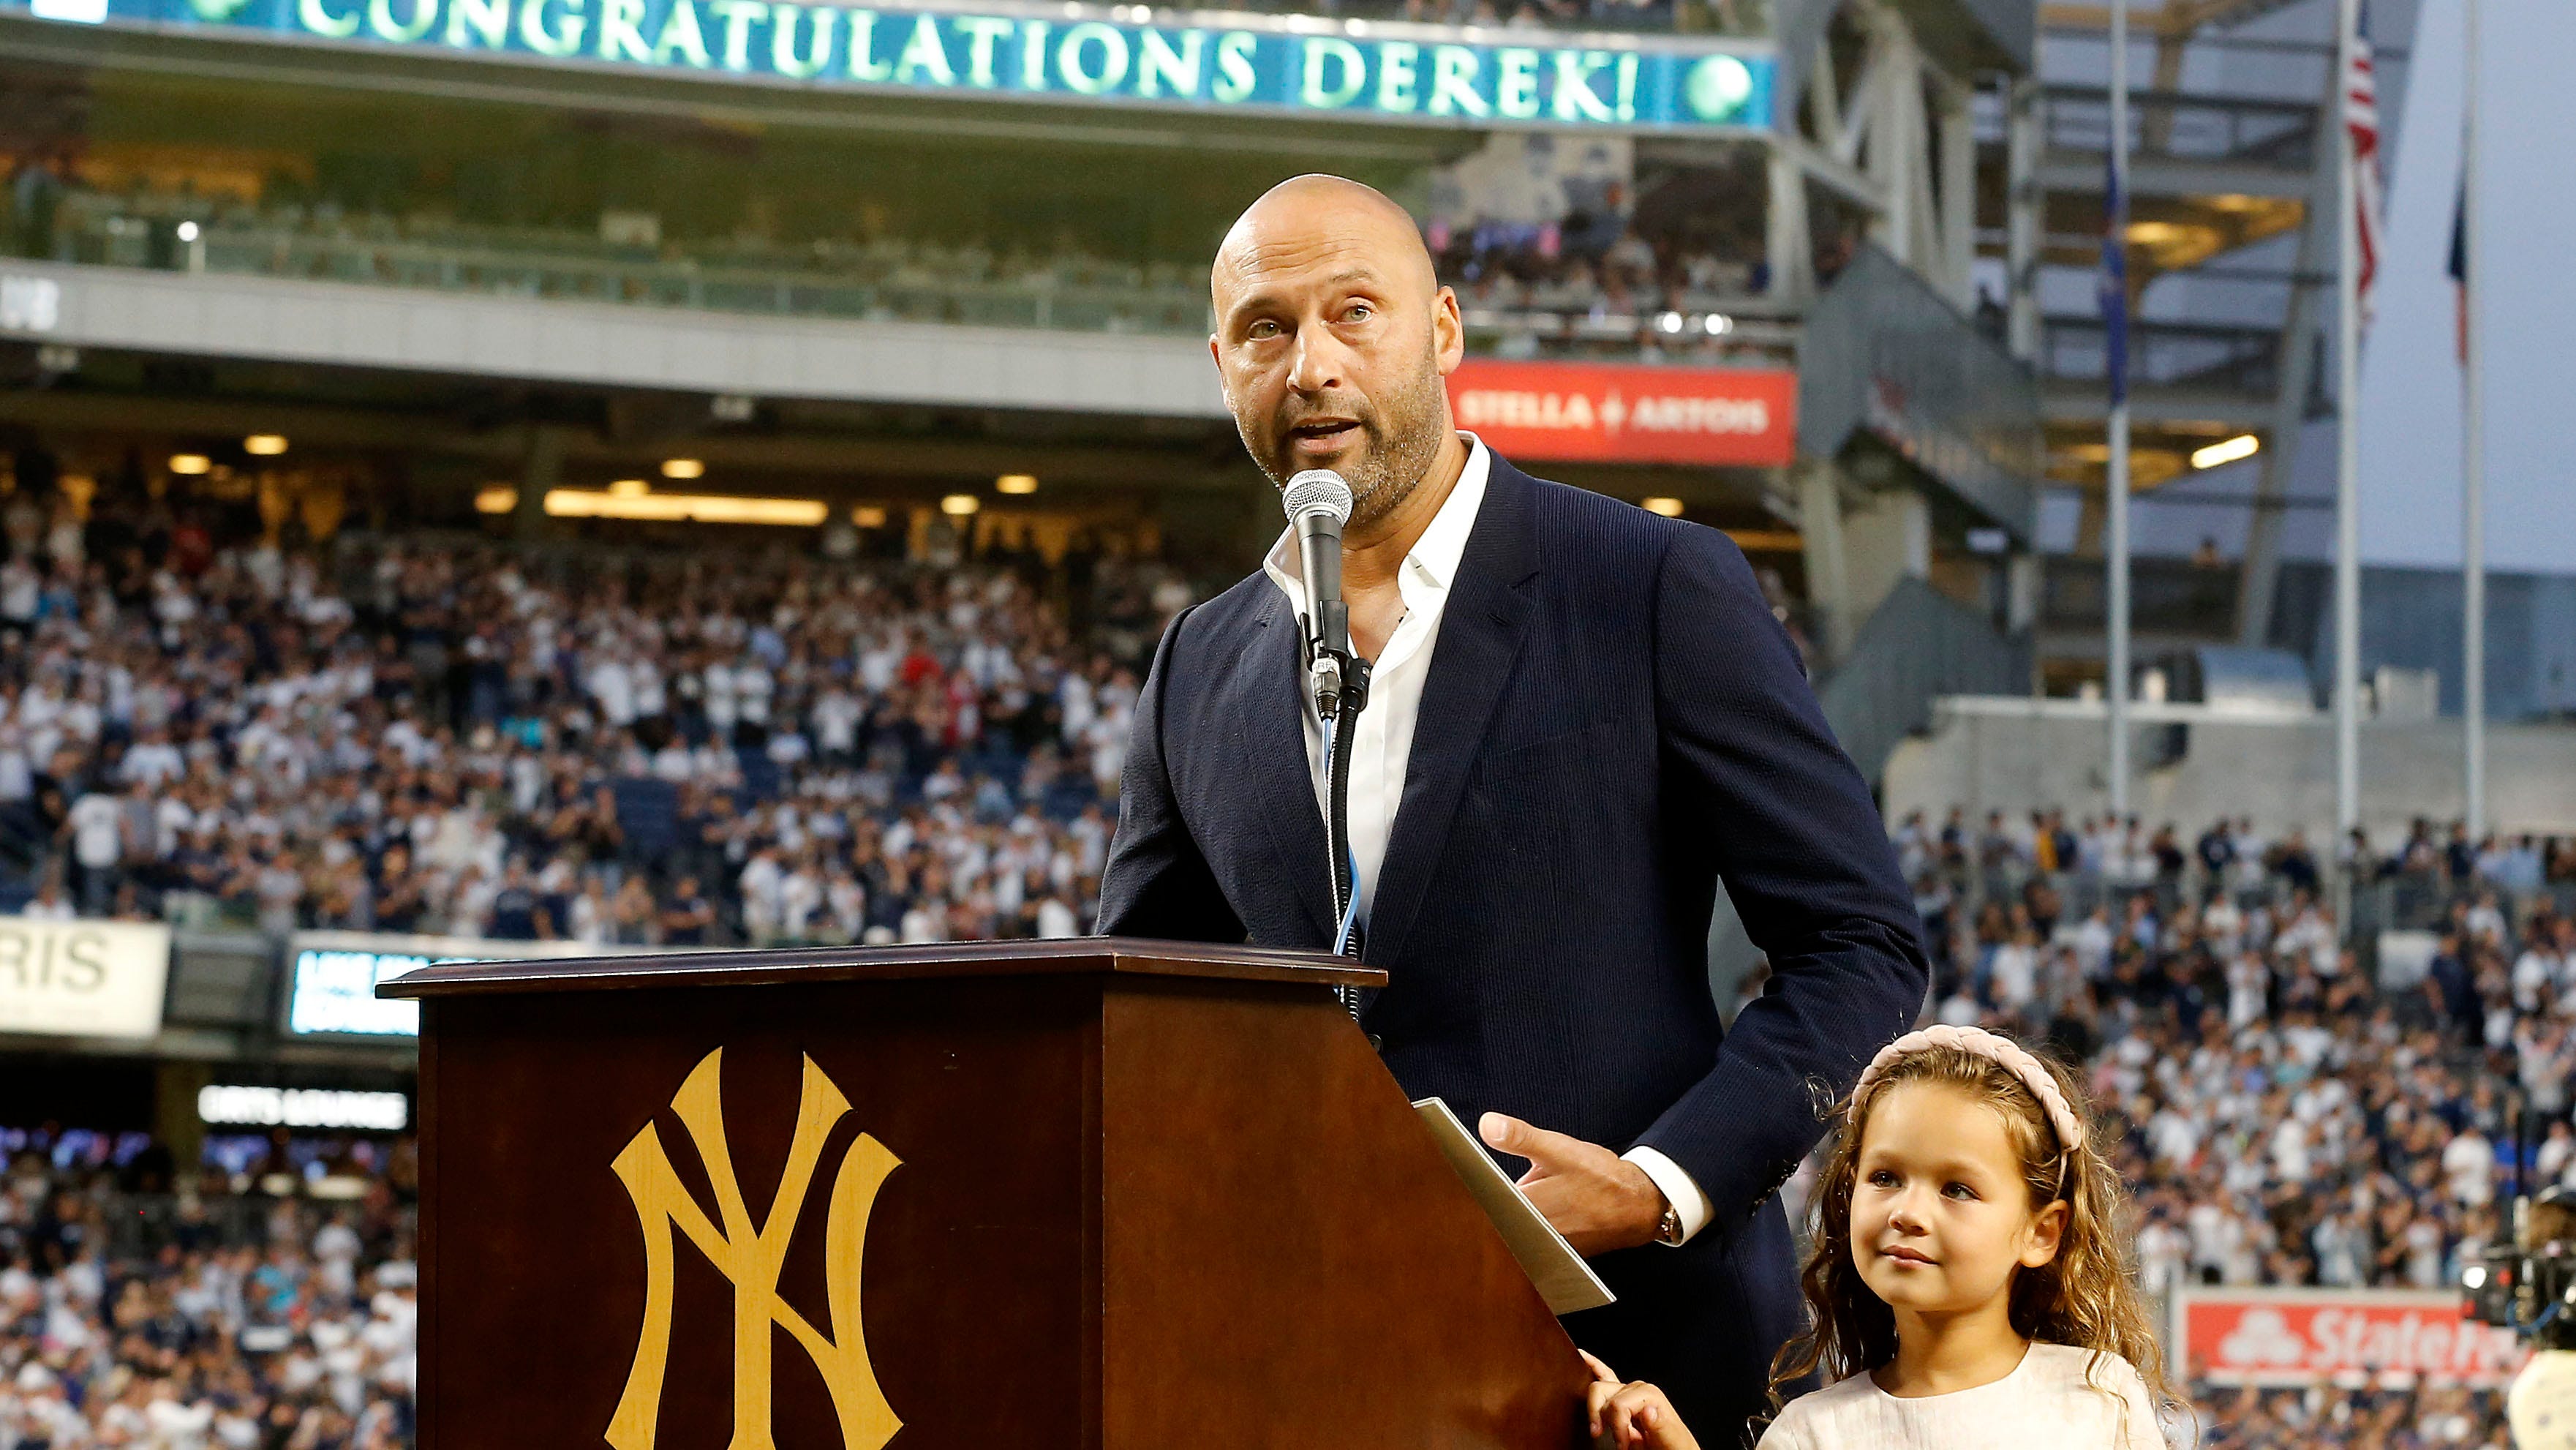 Derek Jeter showered with cheers during Yankees' Hall of Fame